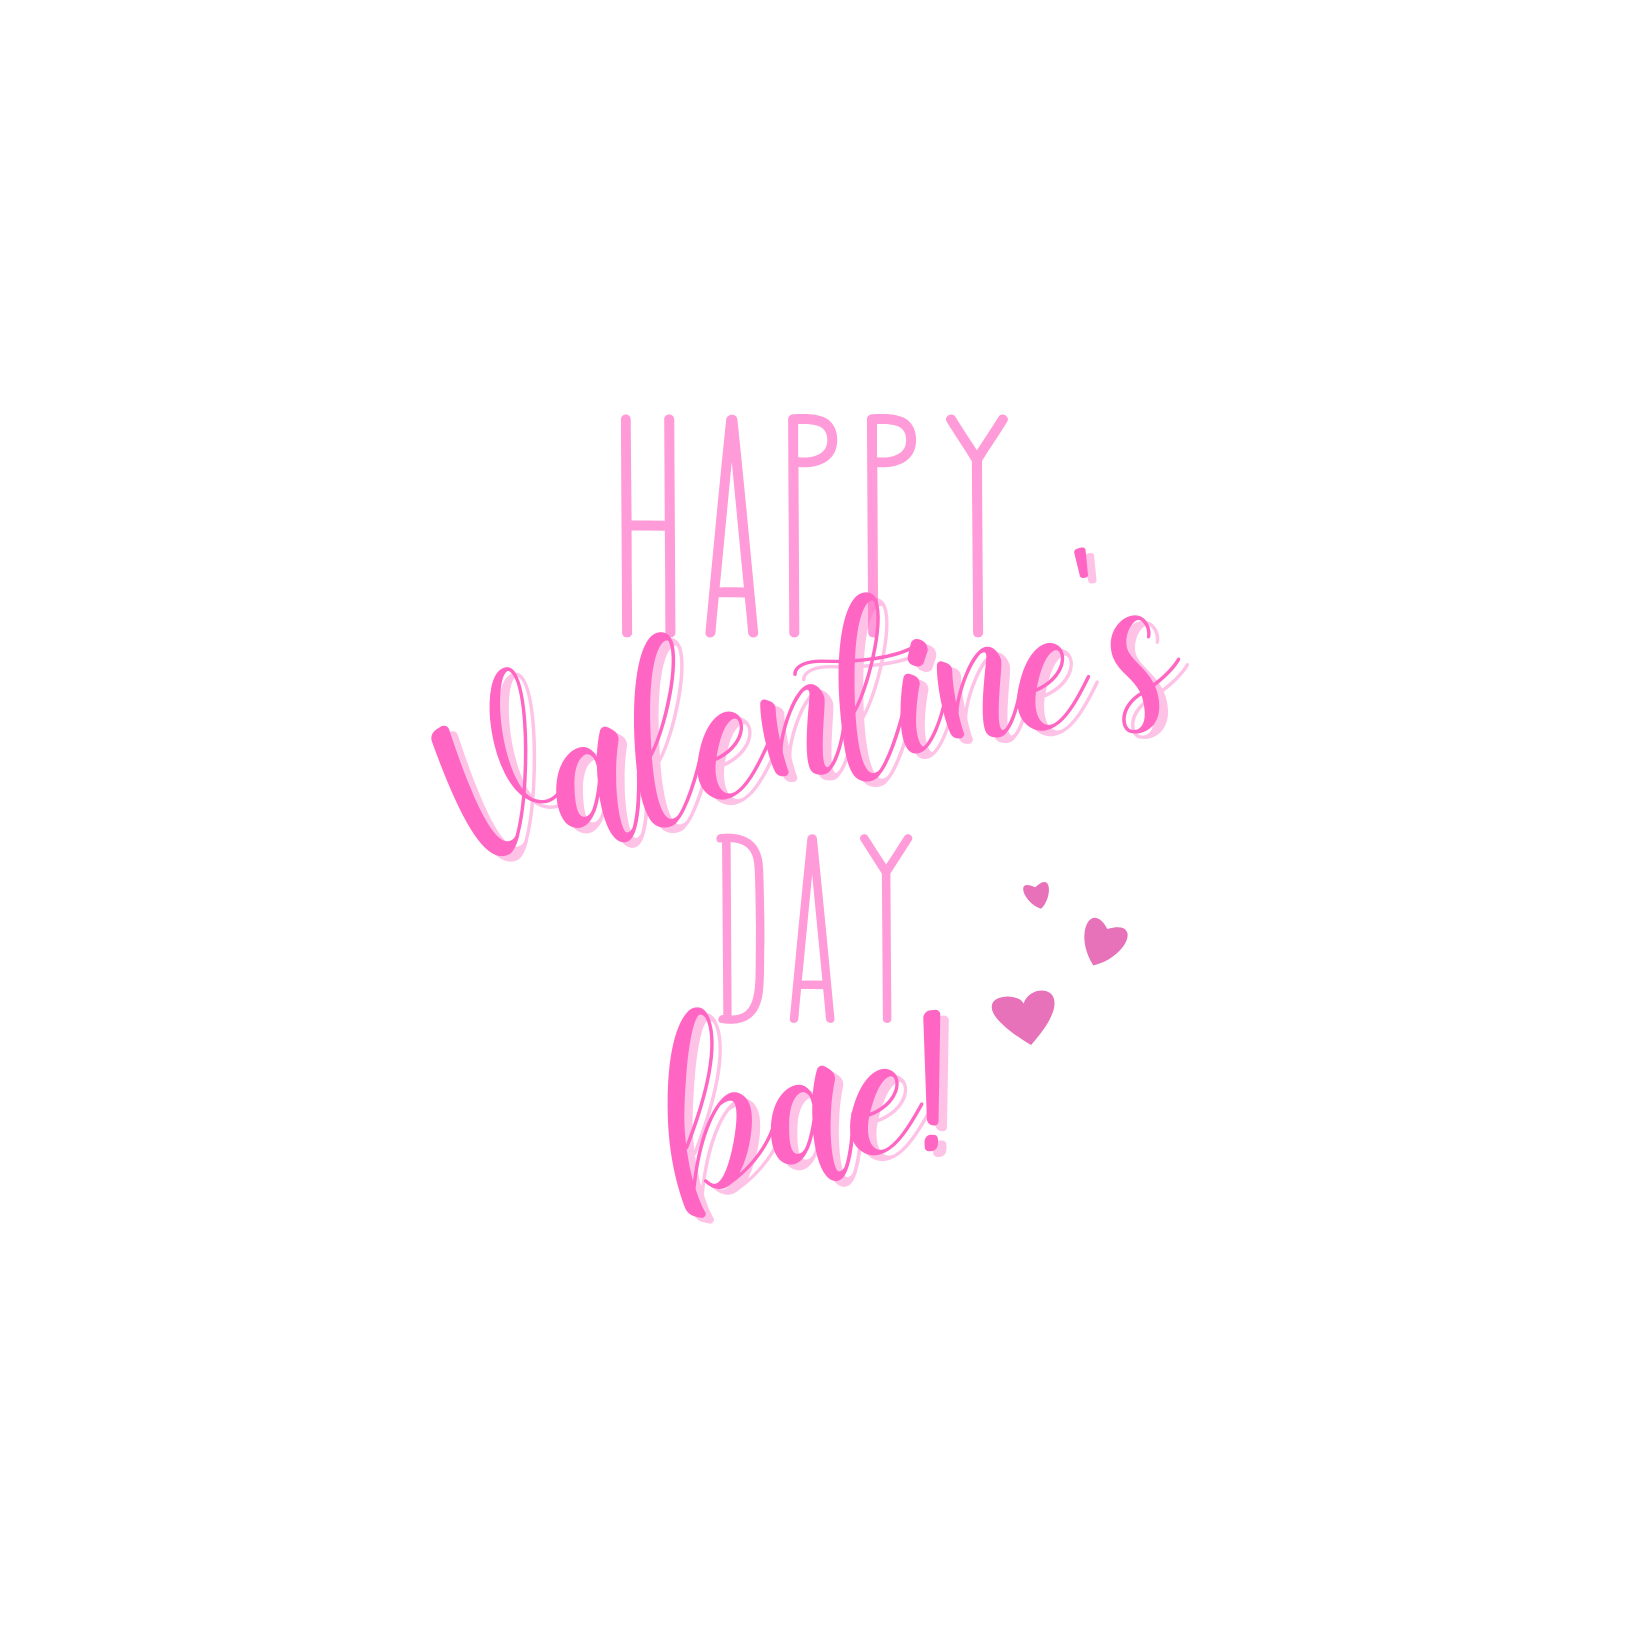 White seed paper greeting card saying "Happy Valentine's Day Bae! " in pink